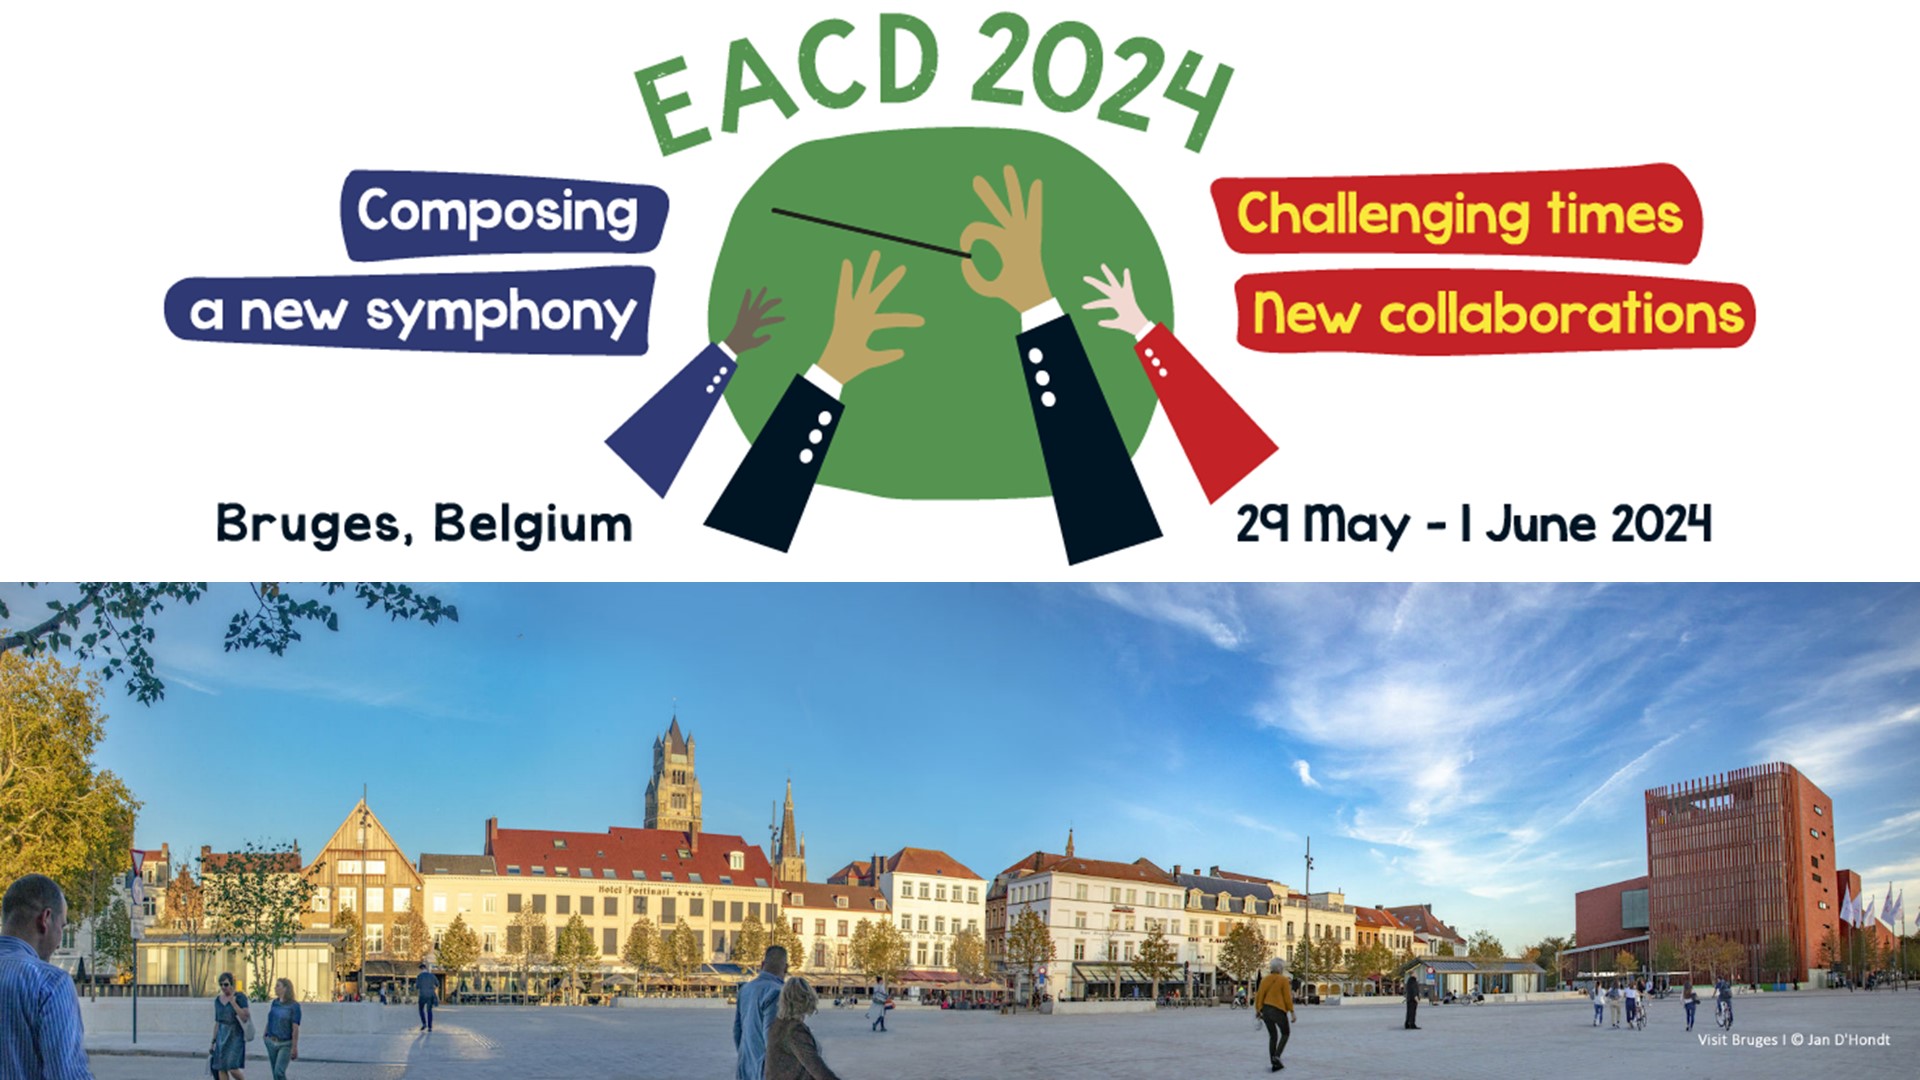 Siriraj Faculty Abroad at the “36th EACD Annual Meeting 2024” in Belgium